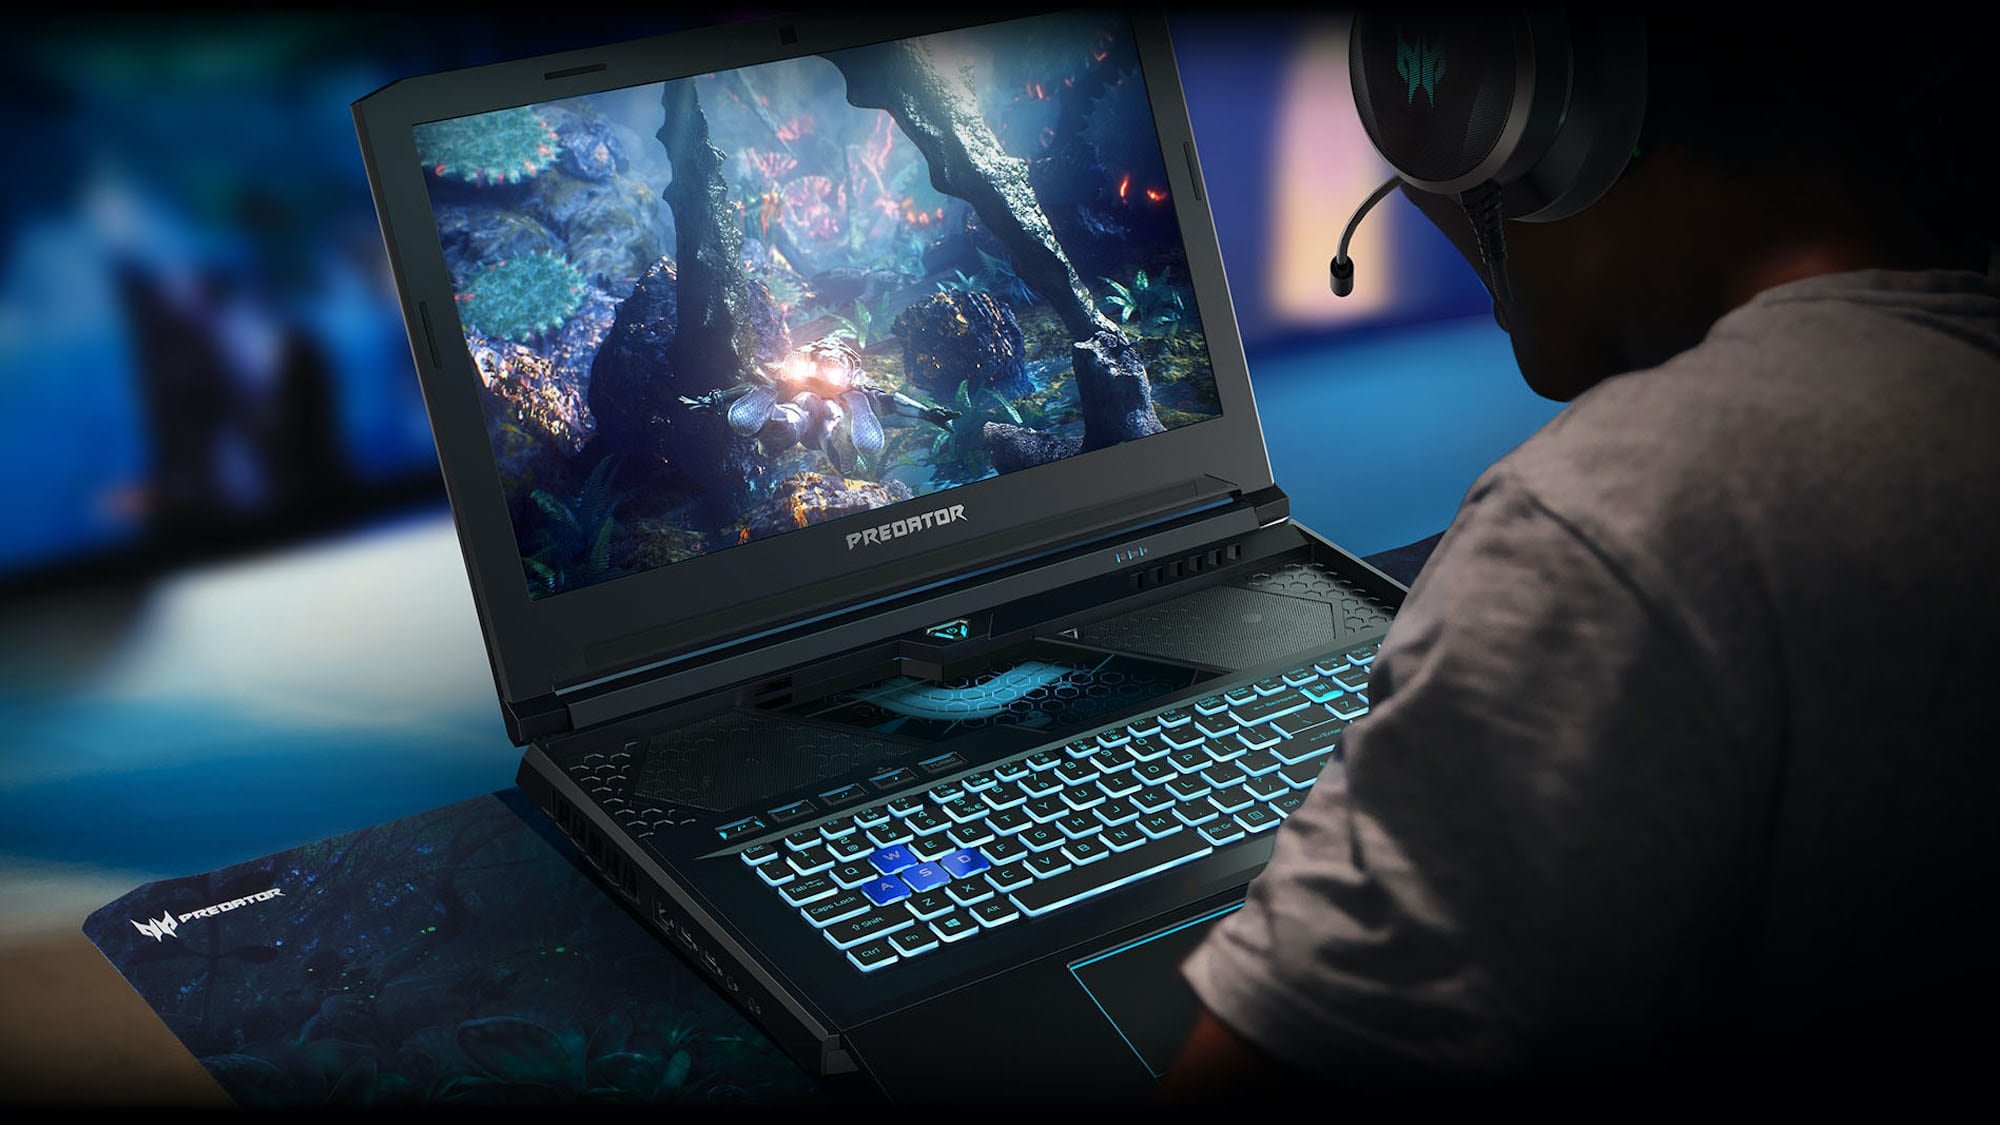 Acer Predator Helios 700 2020 Edition Gaming Laptop takes gaming to another level